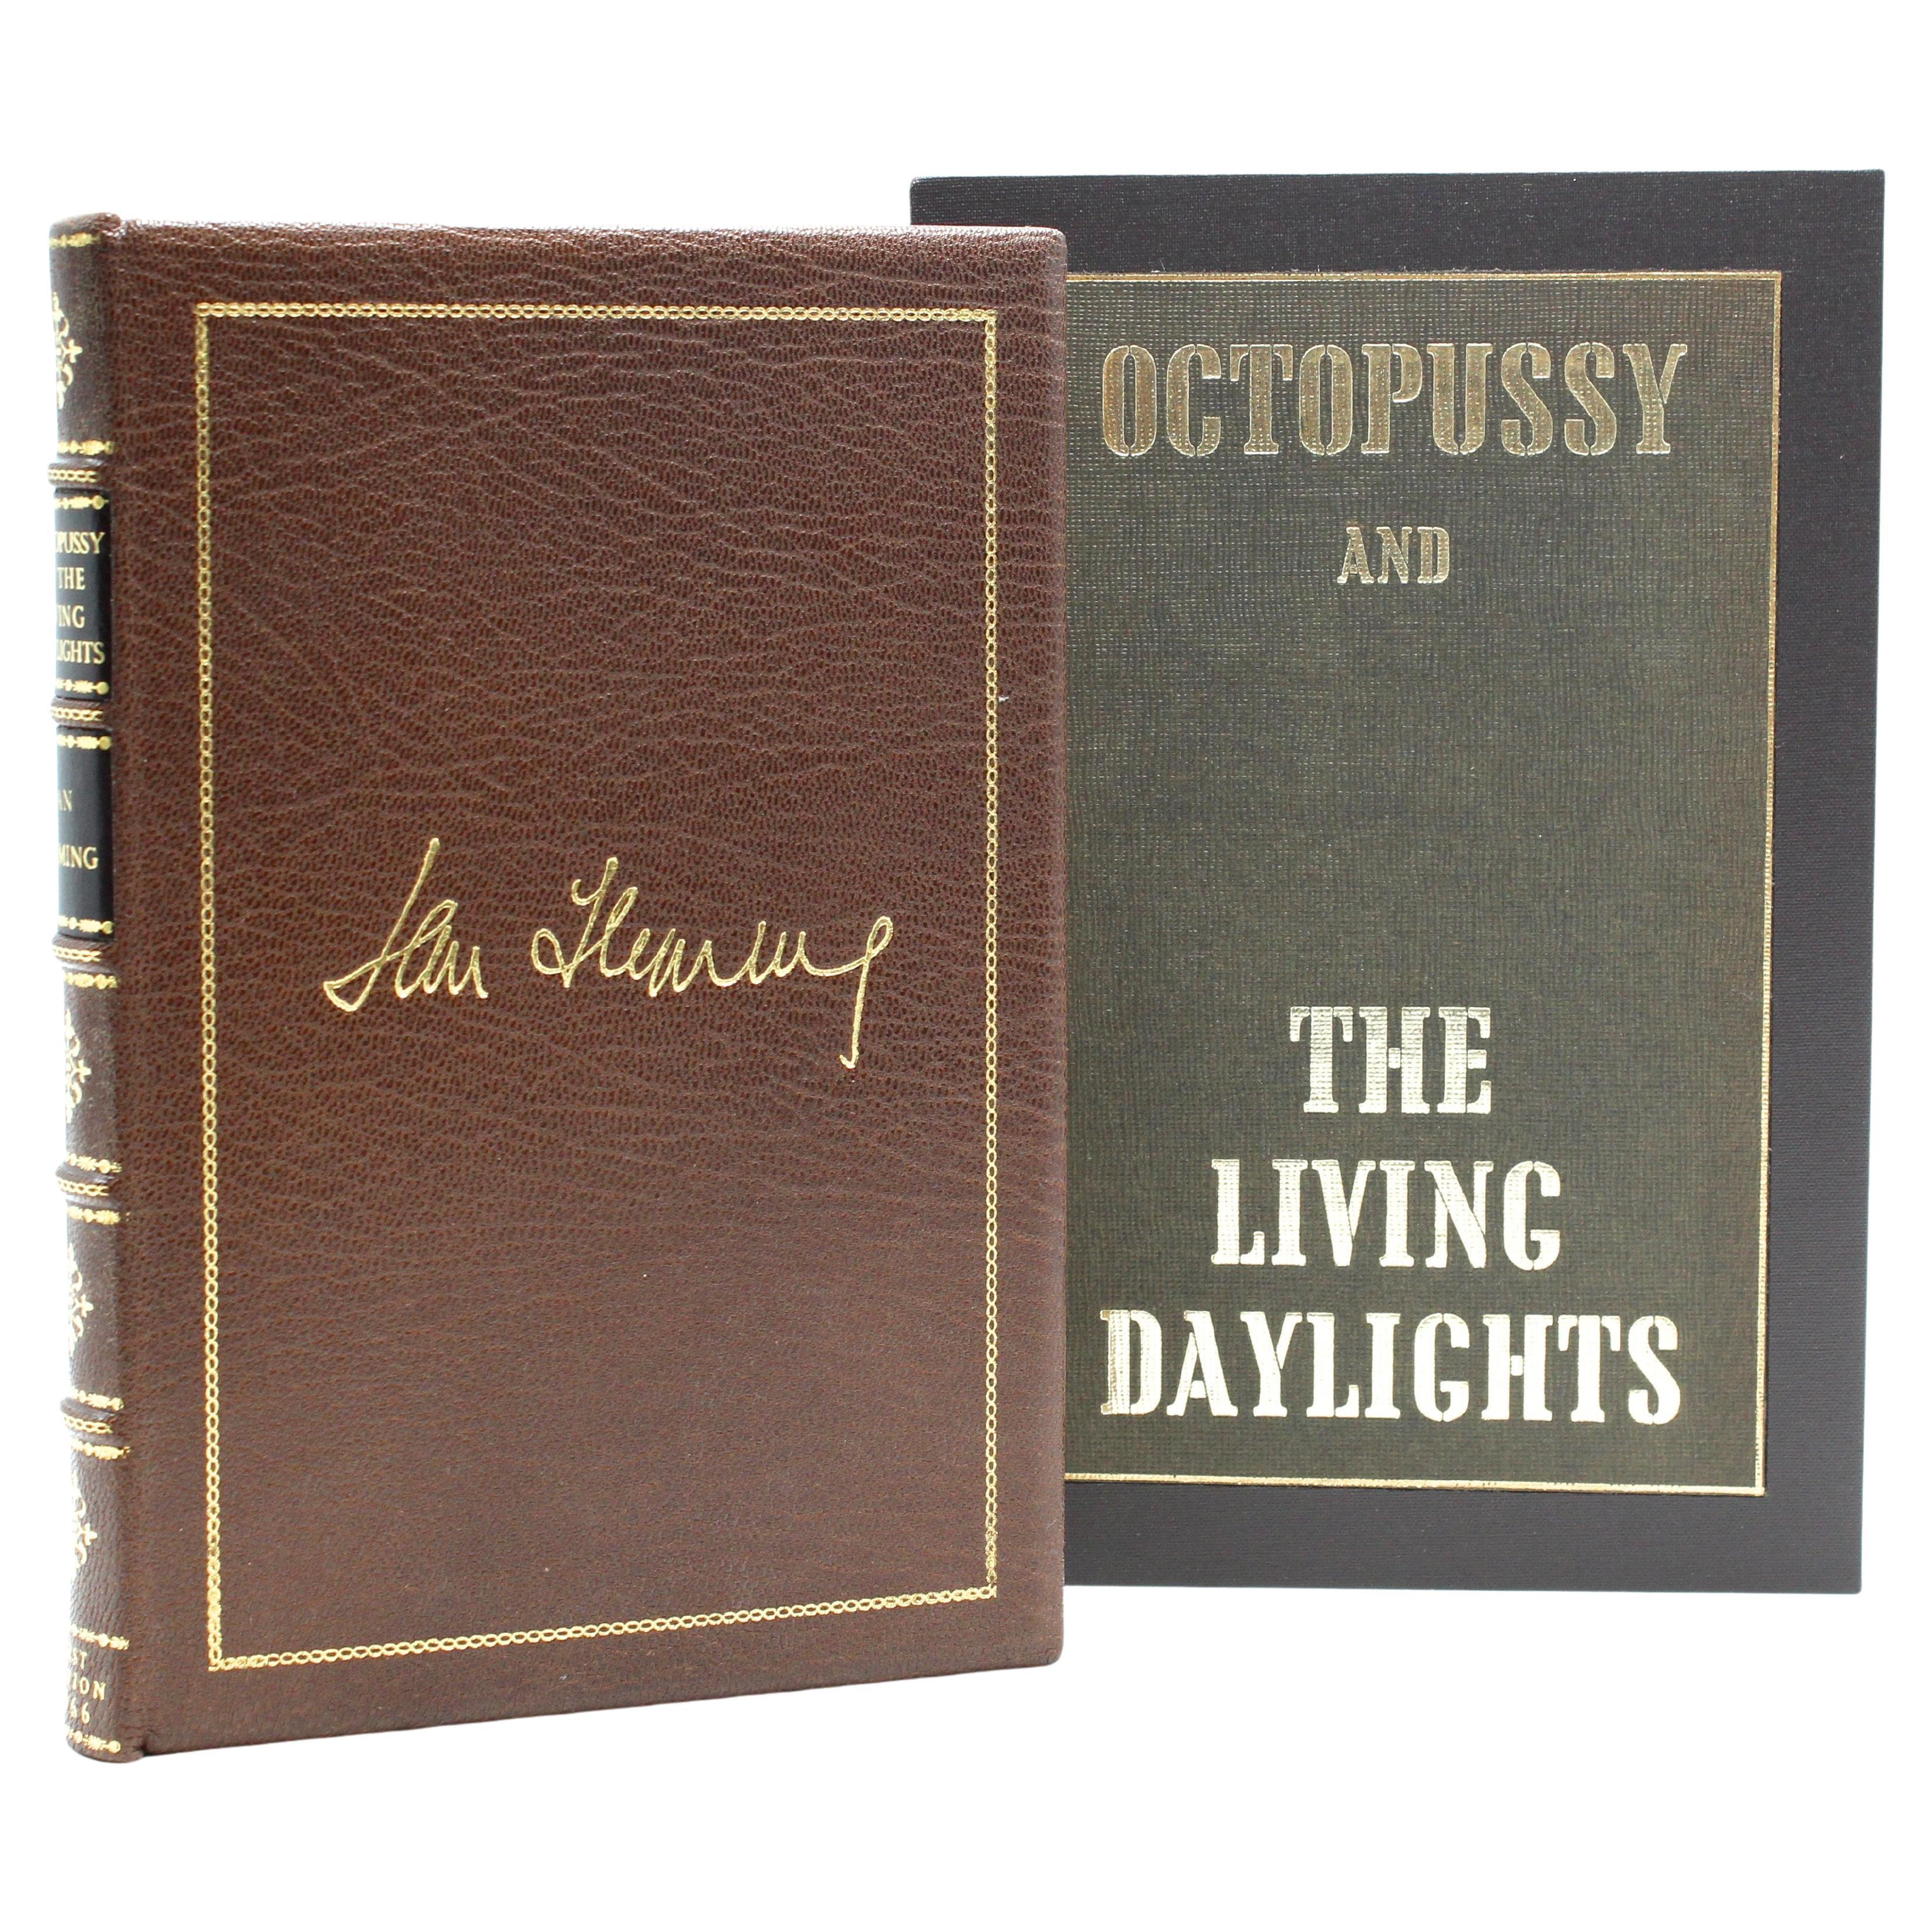 Octopussy and The Living Daylights by Ian Fleming, First UK Edition, 1966